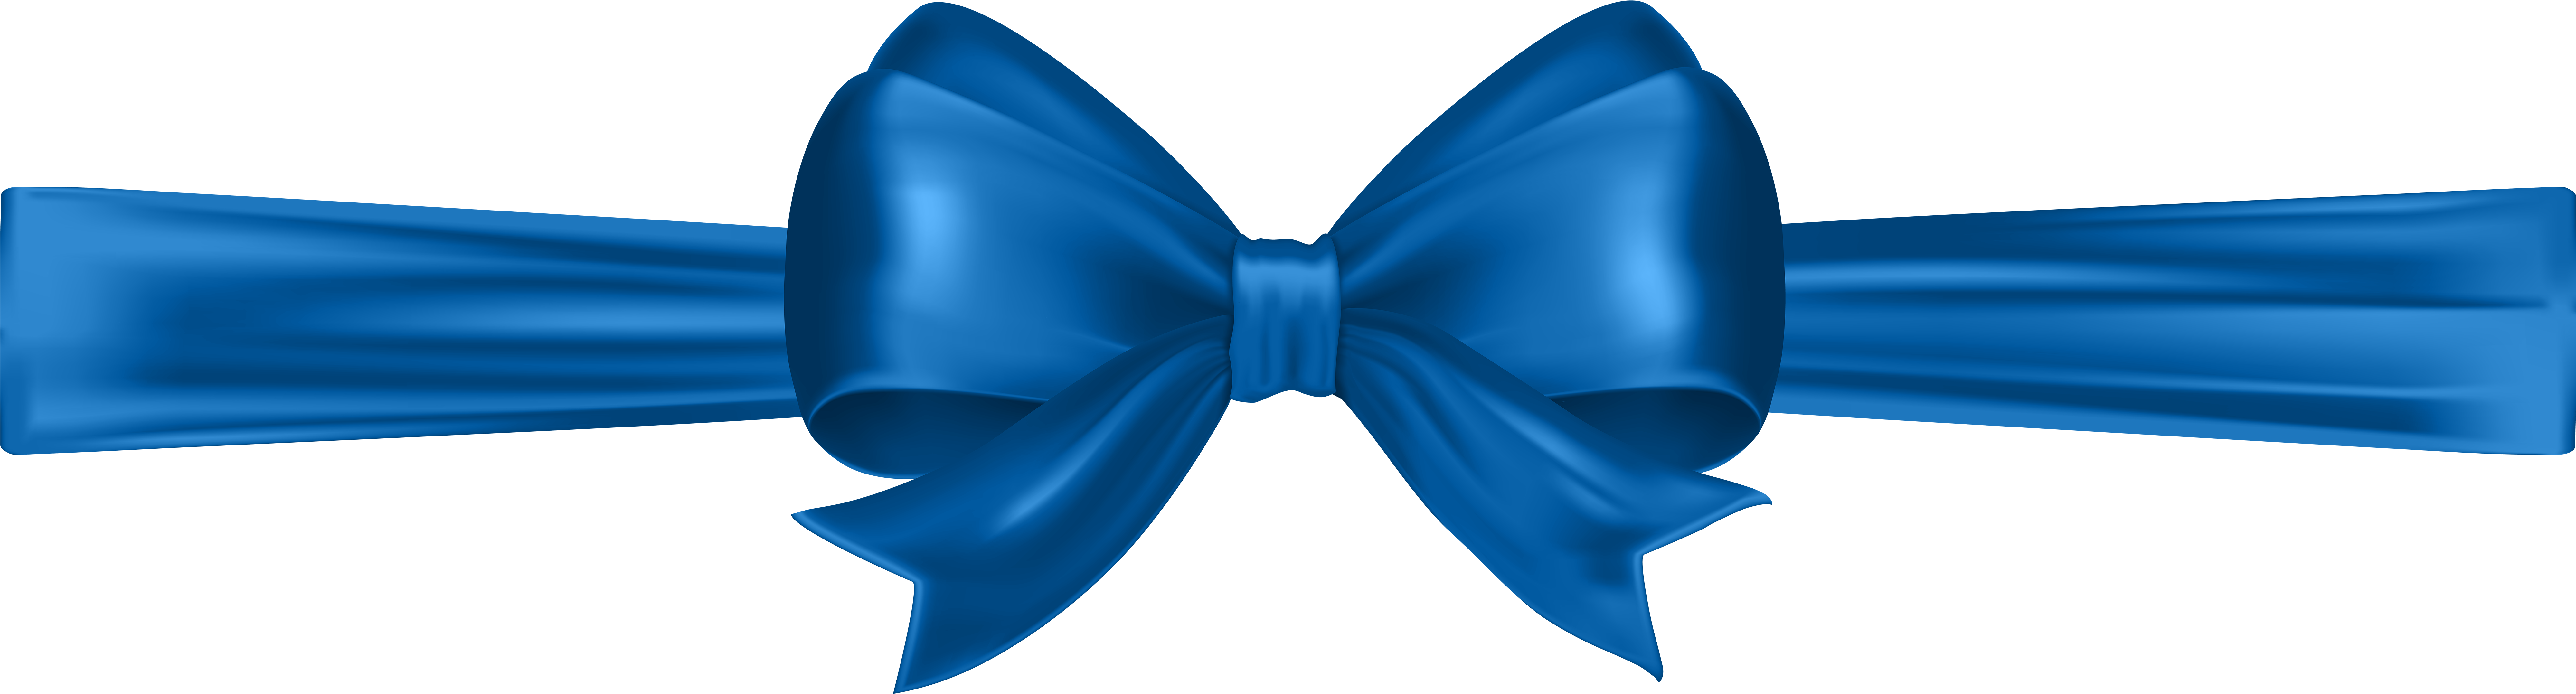 Blue Bow Tie Png Bow Clip Art Png Clip Art Library | Images and Photos ...